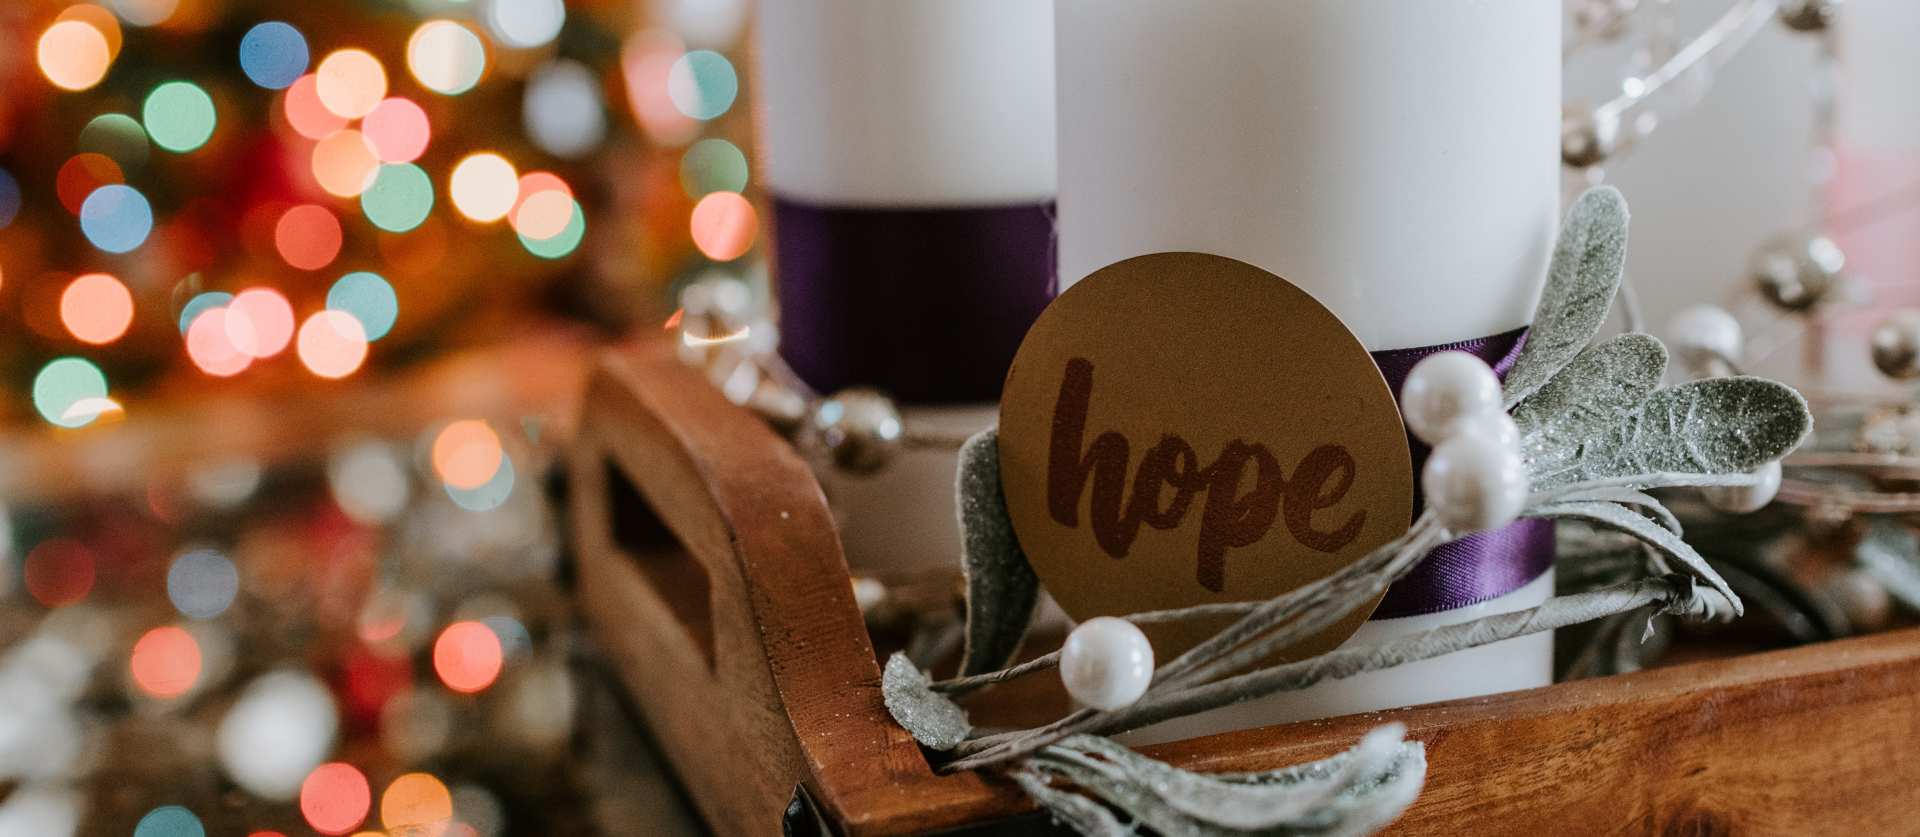 Two advent candles, one labeled "hope", with a Christmas tree in the background.